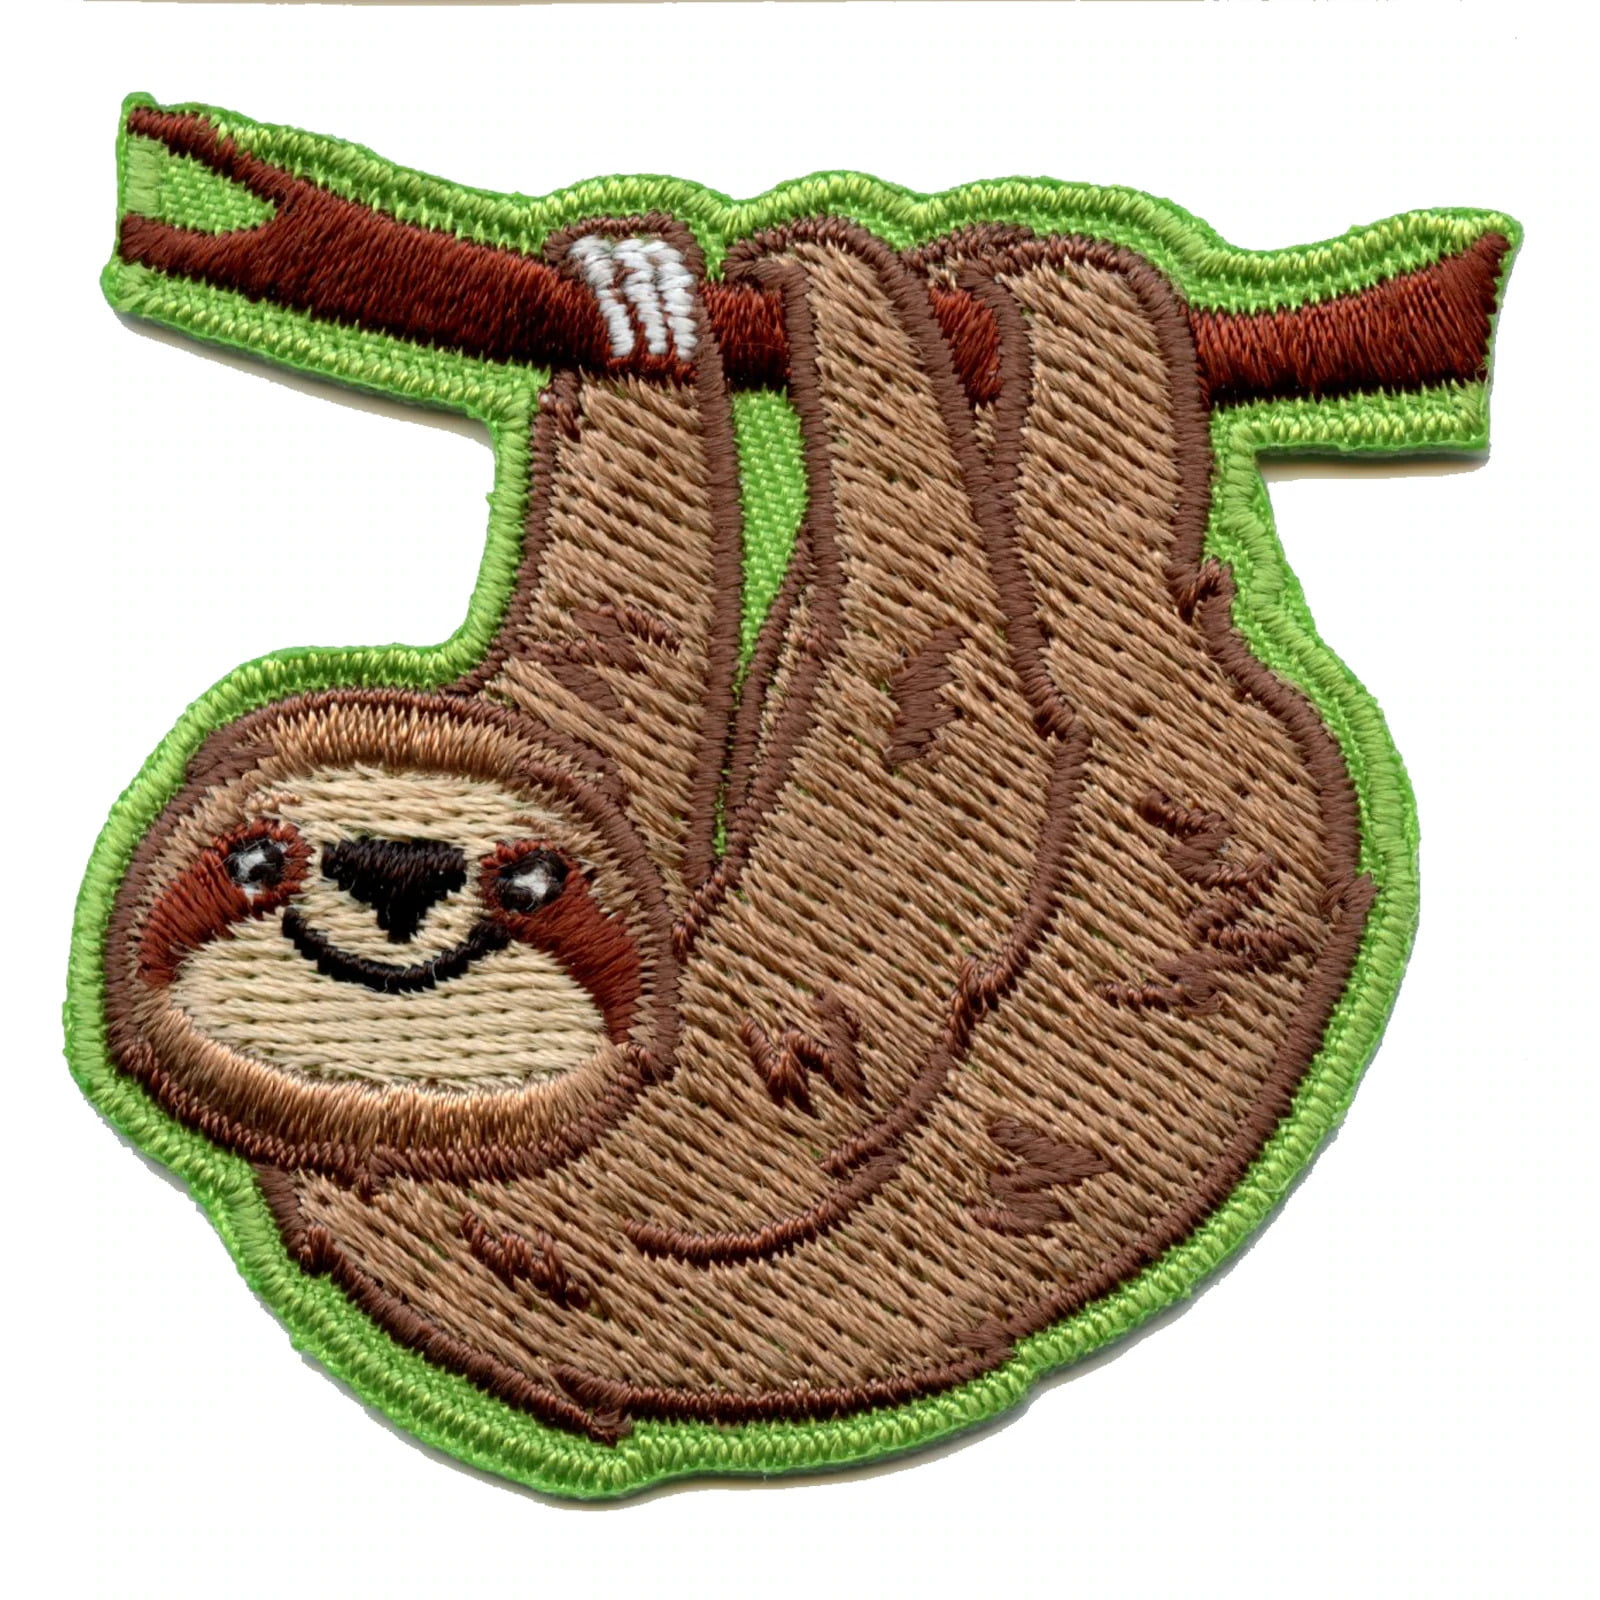 Good Morning Coffee Sloth Iron On Patch On Shirt On Jacket Vest New 